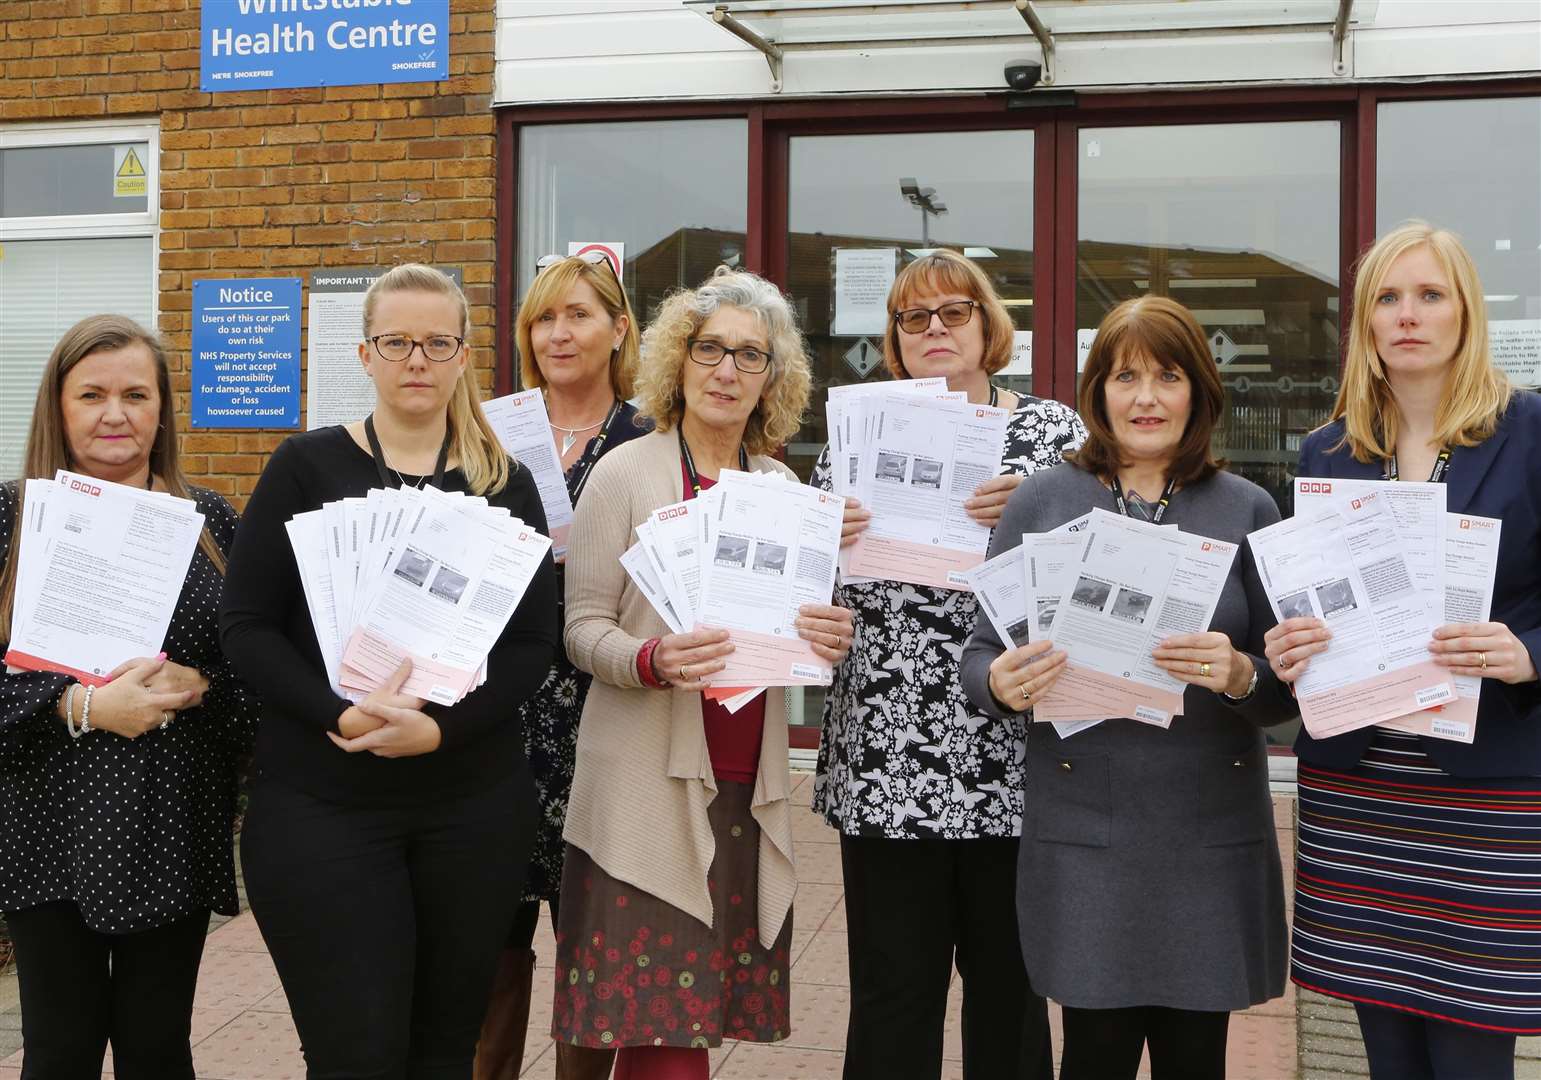 Workers at Whitstable Health Centre have been handed dozens of fines by Smart Parking